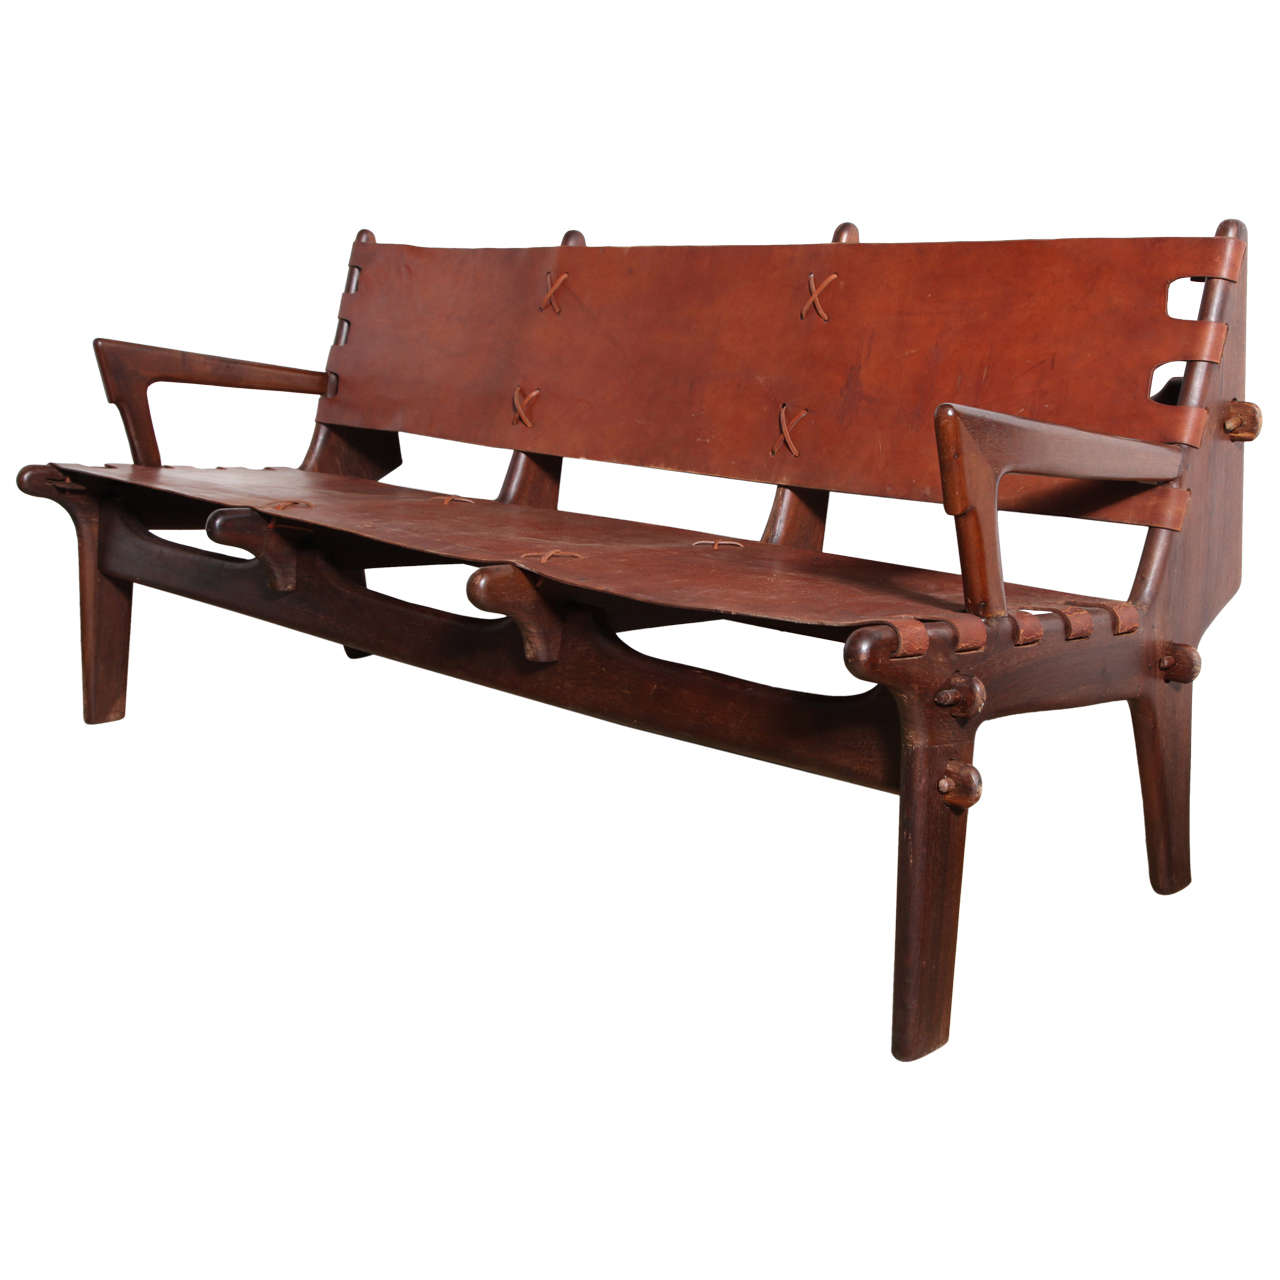 Angel Pazmino Three-Seat Sofa in Rosewood & Leather, Made in Equador, 1960's